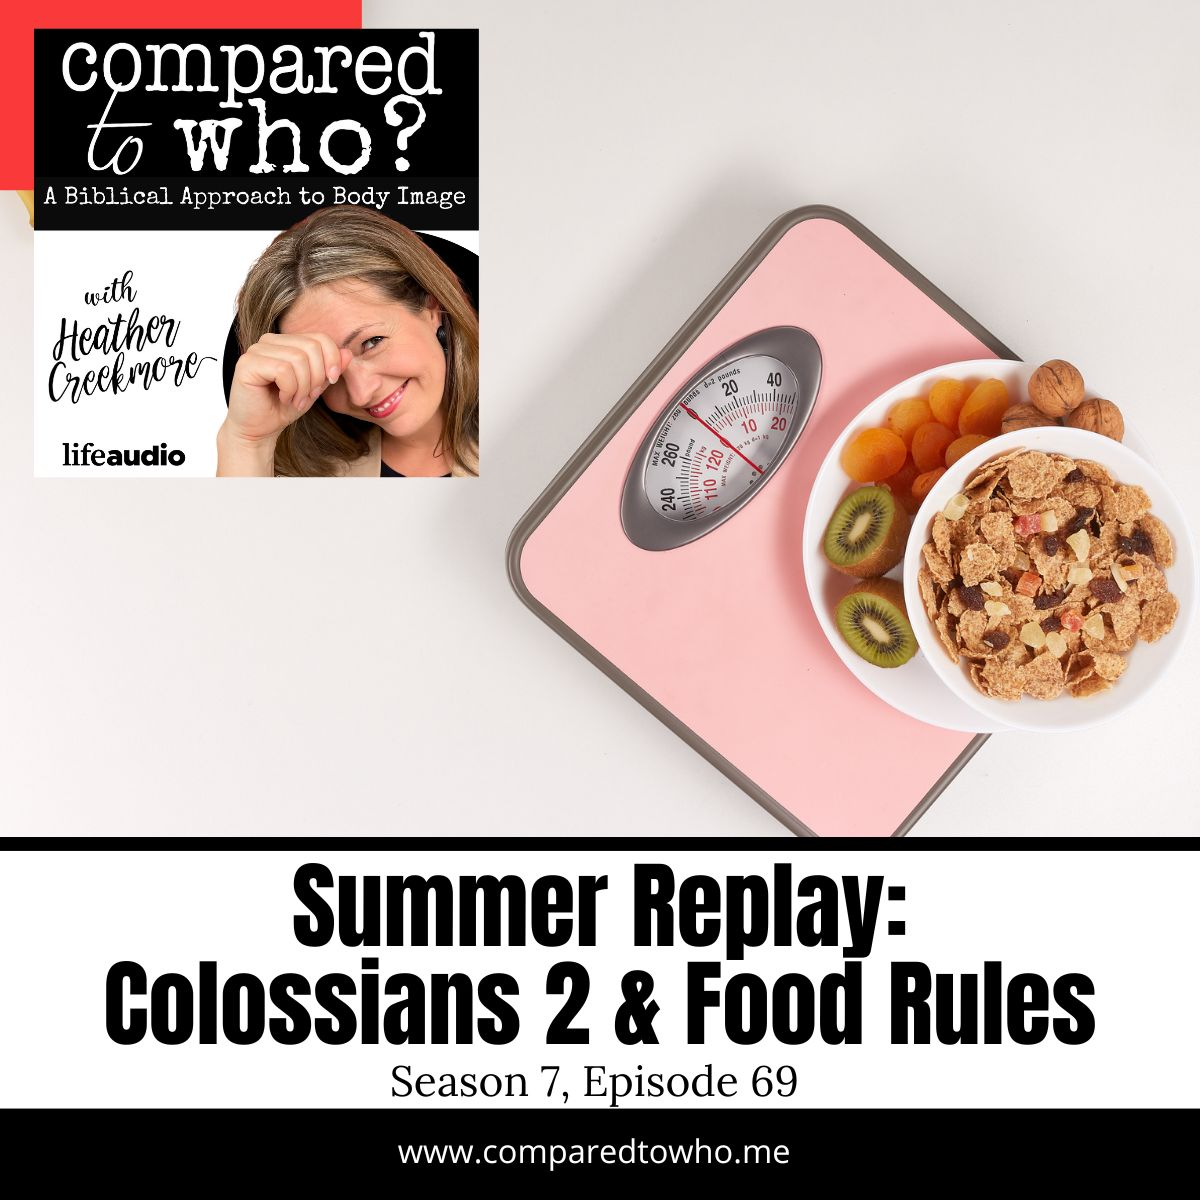 Colossians 2: Does the New Testament Endorse Food Rules?